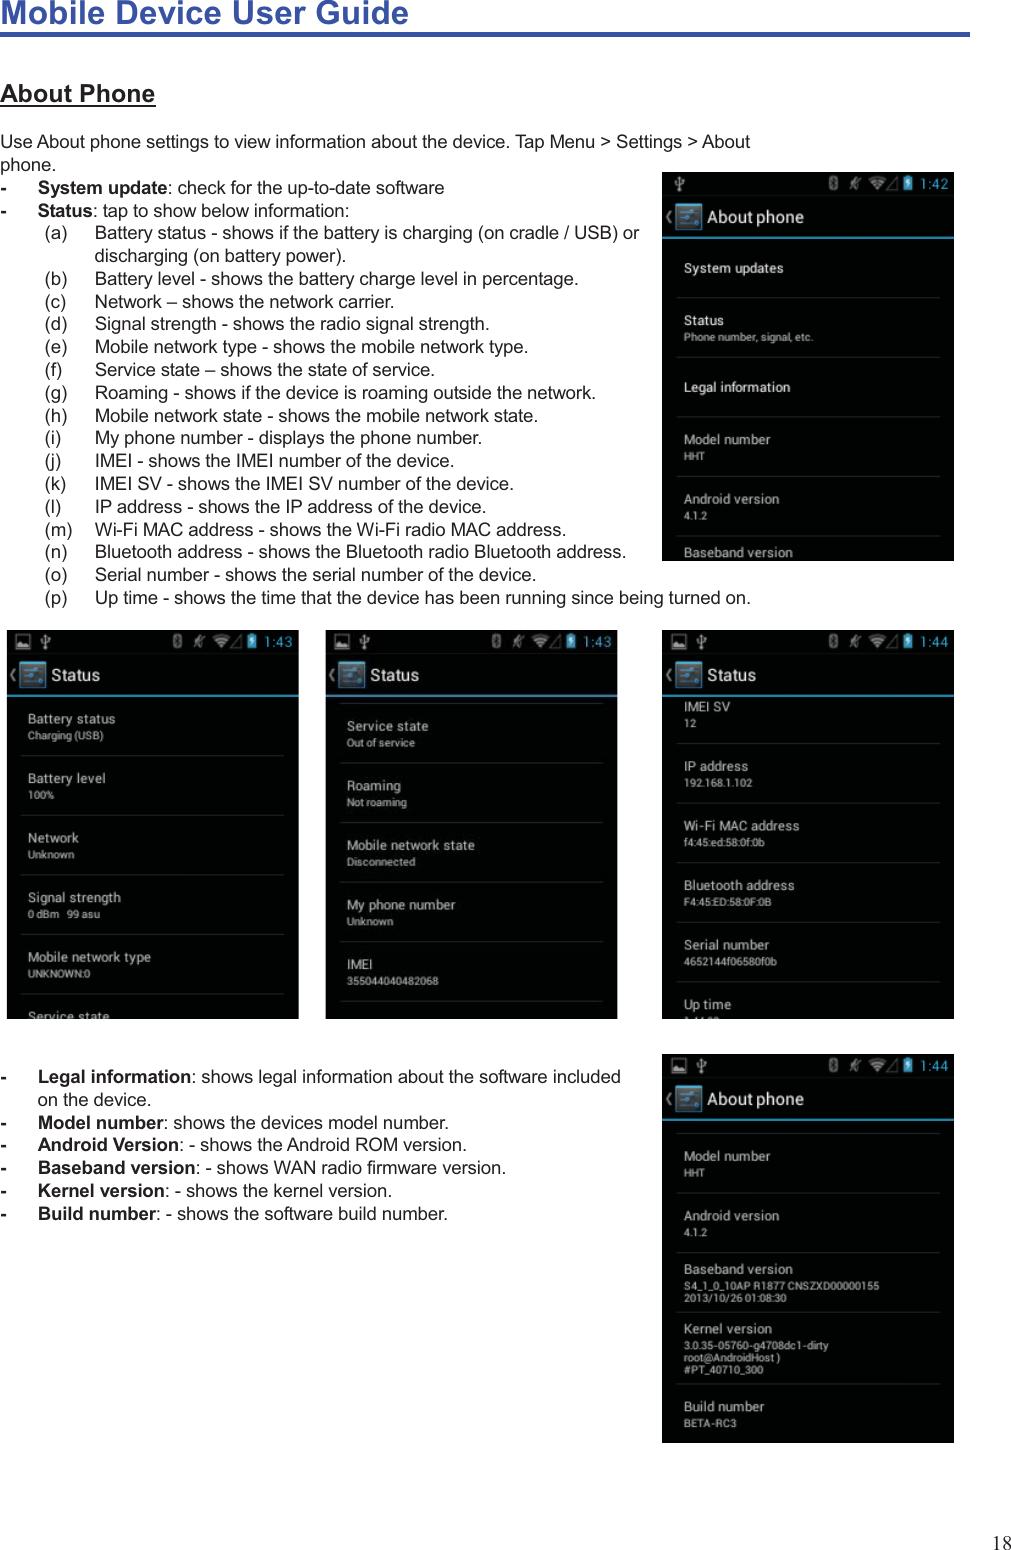 Mobile Device User Guide                                                                                                                                                                                                                                                                                                                                                                                                                                                                                                                                             18 About Phone Use About phone settings to view information about the device. Tap Menu &gt; Settings &gt; About phone.  - System update: check for the up-to-date software - Status: tap to show below information:   (a)  Battery status - shows if the battery is charging (on cradle / USB) or discharging (on battery power).   (b)  Battery level - shows the battery charge level in percentage.   (c) Network – shows the network carrier.   (d) Signal strength - shows the radio signal strength.   (e)  Mobile network type - shows the mobile network type.   (f) Service state – shows the state of service.   (g)  Roaming - shows if the device is roaming outside the network.   (h)  Mobile network state - shows the mobile network state.   (i)  My phone number - displays the phone number.   (j)  IMEI - shows the IMEI number of the device.   (k)  IMEI SV - shows the IMEI SV number of the device.   (l)  IP address - shows the IP address of the device.   (m)  Wi-Fi MAC address - shows the Wi-Fi radio MAC address.   (n)  Bluetooth address - shows the Bluetooth radio Bluetooth address.   (o)  Serial number - shows the serial number of the device.   (p)  Up time - shows the time that the device has been running since being turned on.                       - Legal information: shows legal information about the software included on the device.   - Model number: shows the devices model number.   - Android Version: - shows the Android ROM version.   - Baseband version: - shows WAN radio firmware version.   - Kernel version: - shows the kernel version.   - Build number: - shows the software build number.             